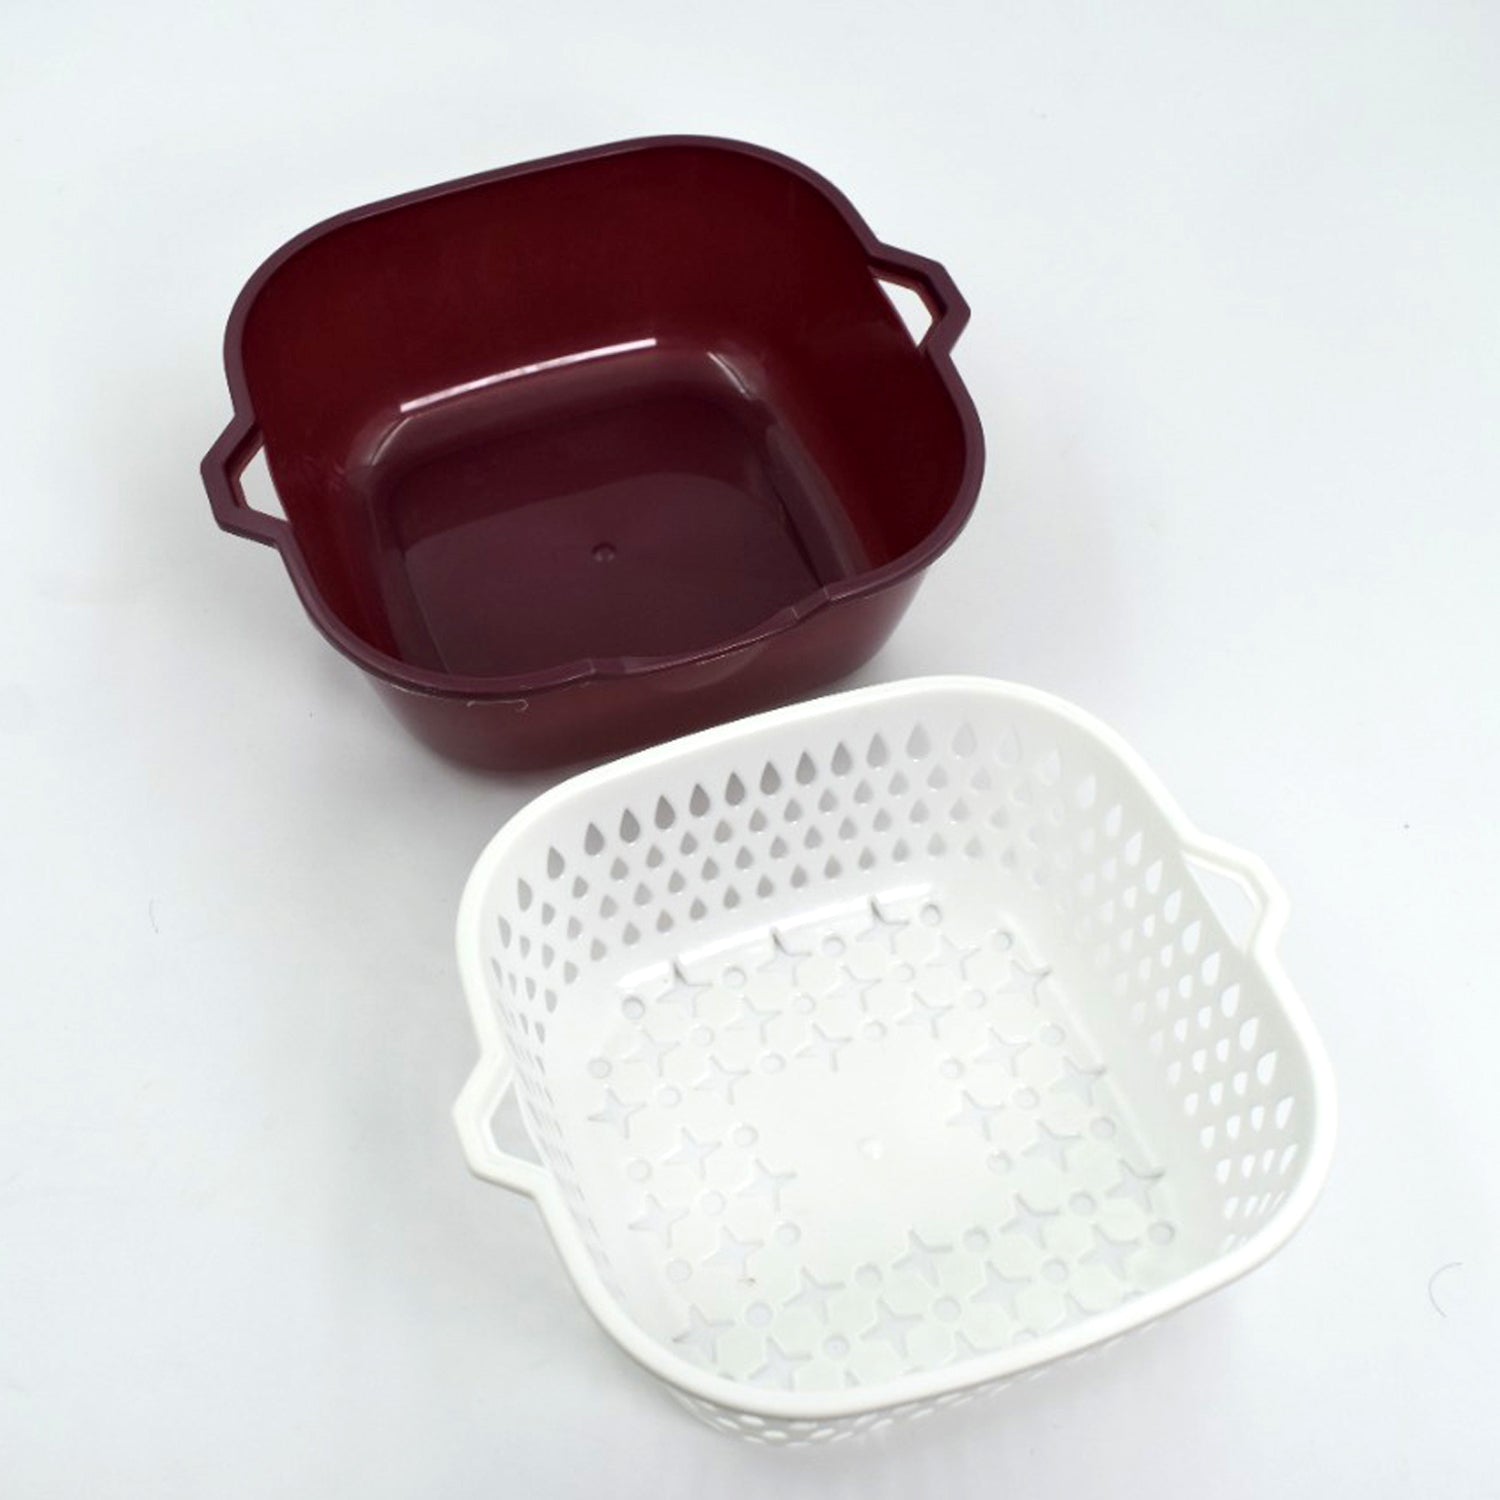 2783 2 In 1 Basket Strainer To Rinse Various Types Of Items Like Fruits, Vegetables Etc. DeoDap